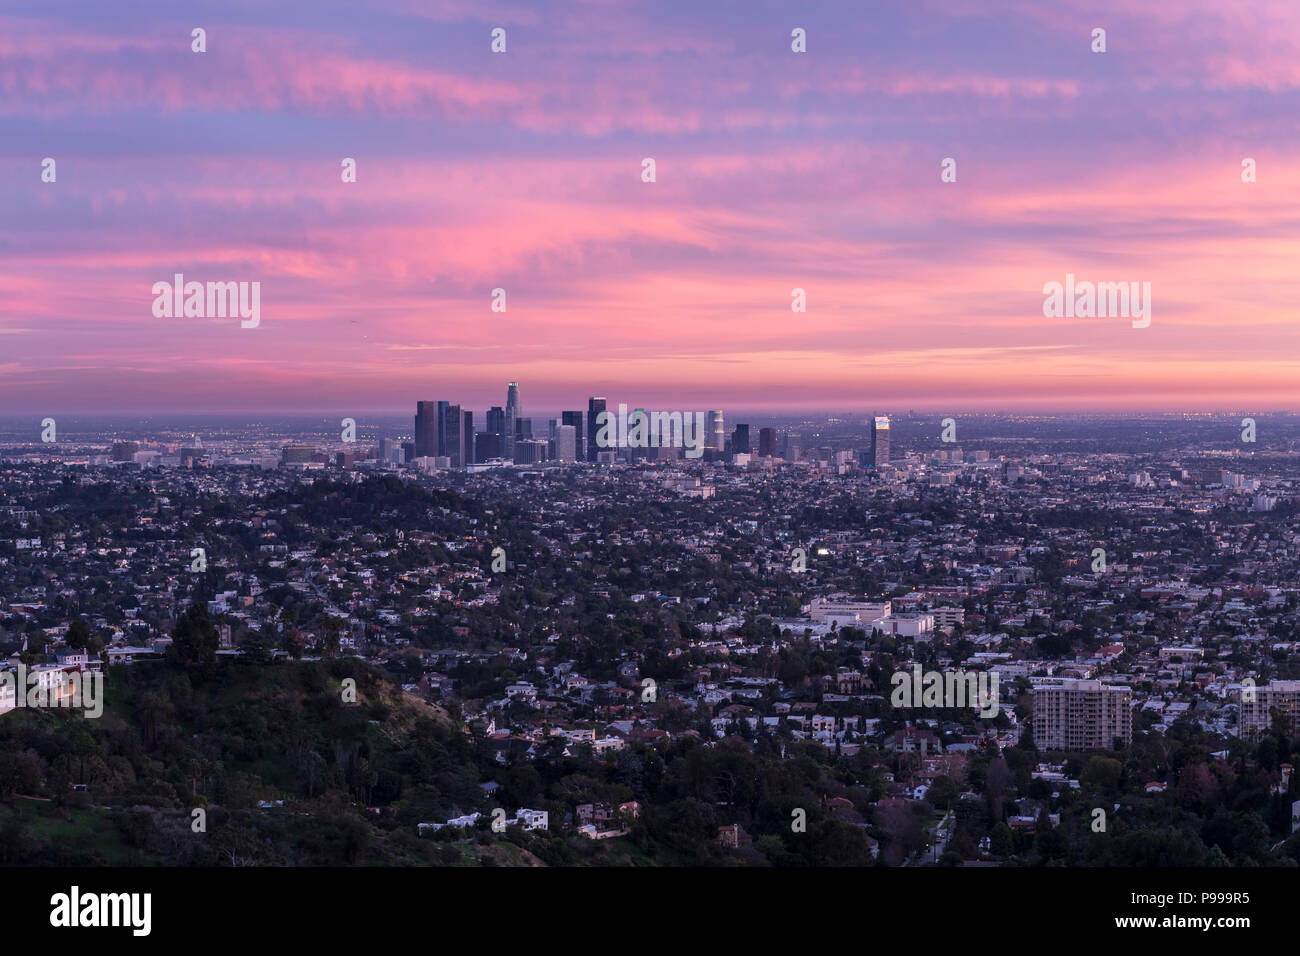 Dusk view of downtown Los Angeles California from Griffith Park in the Santa Monica Mountains. Stock Photo